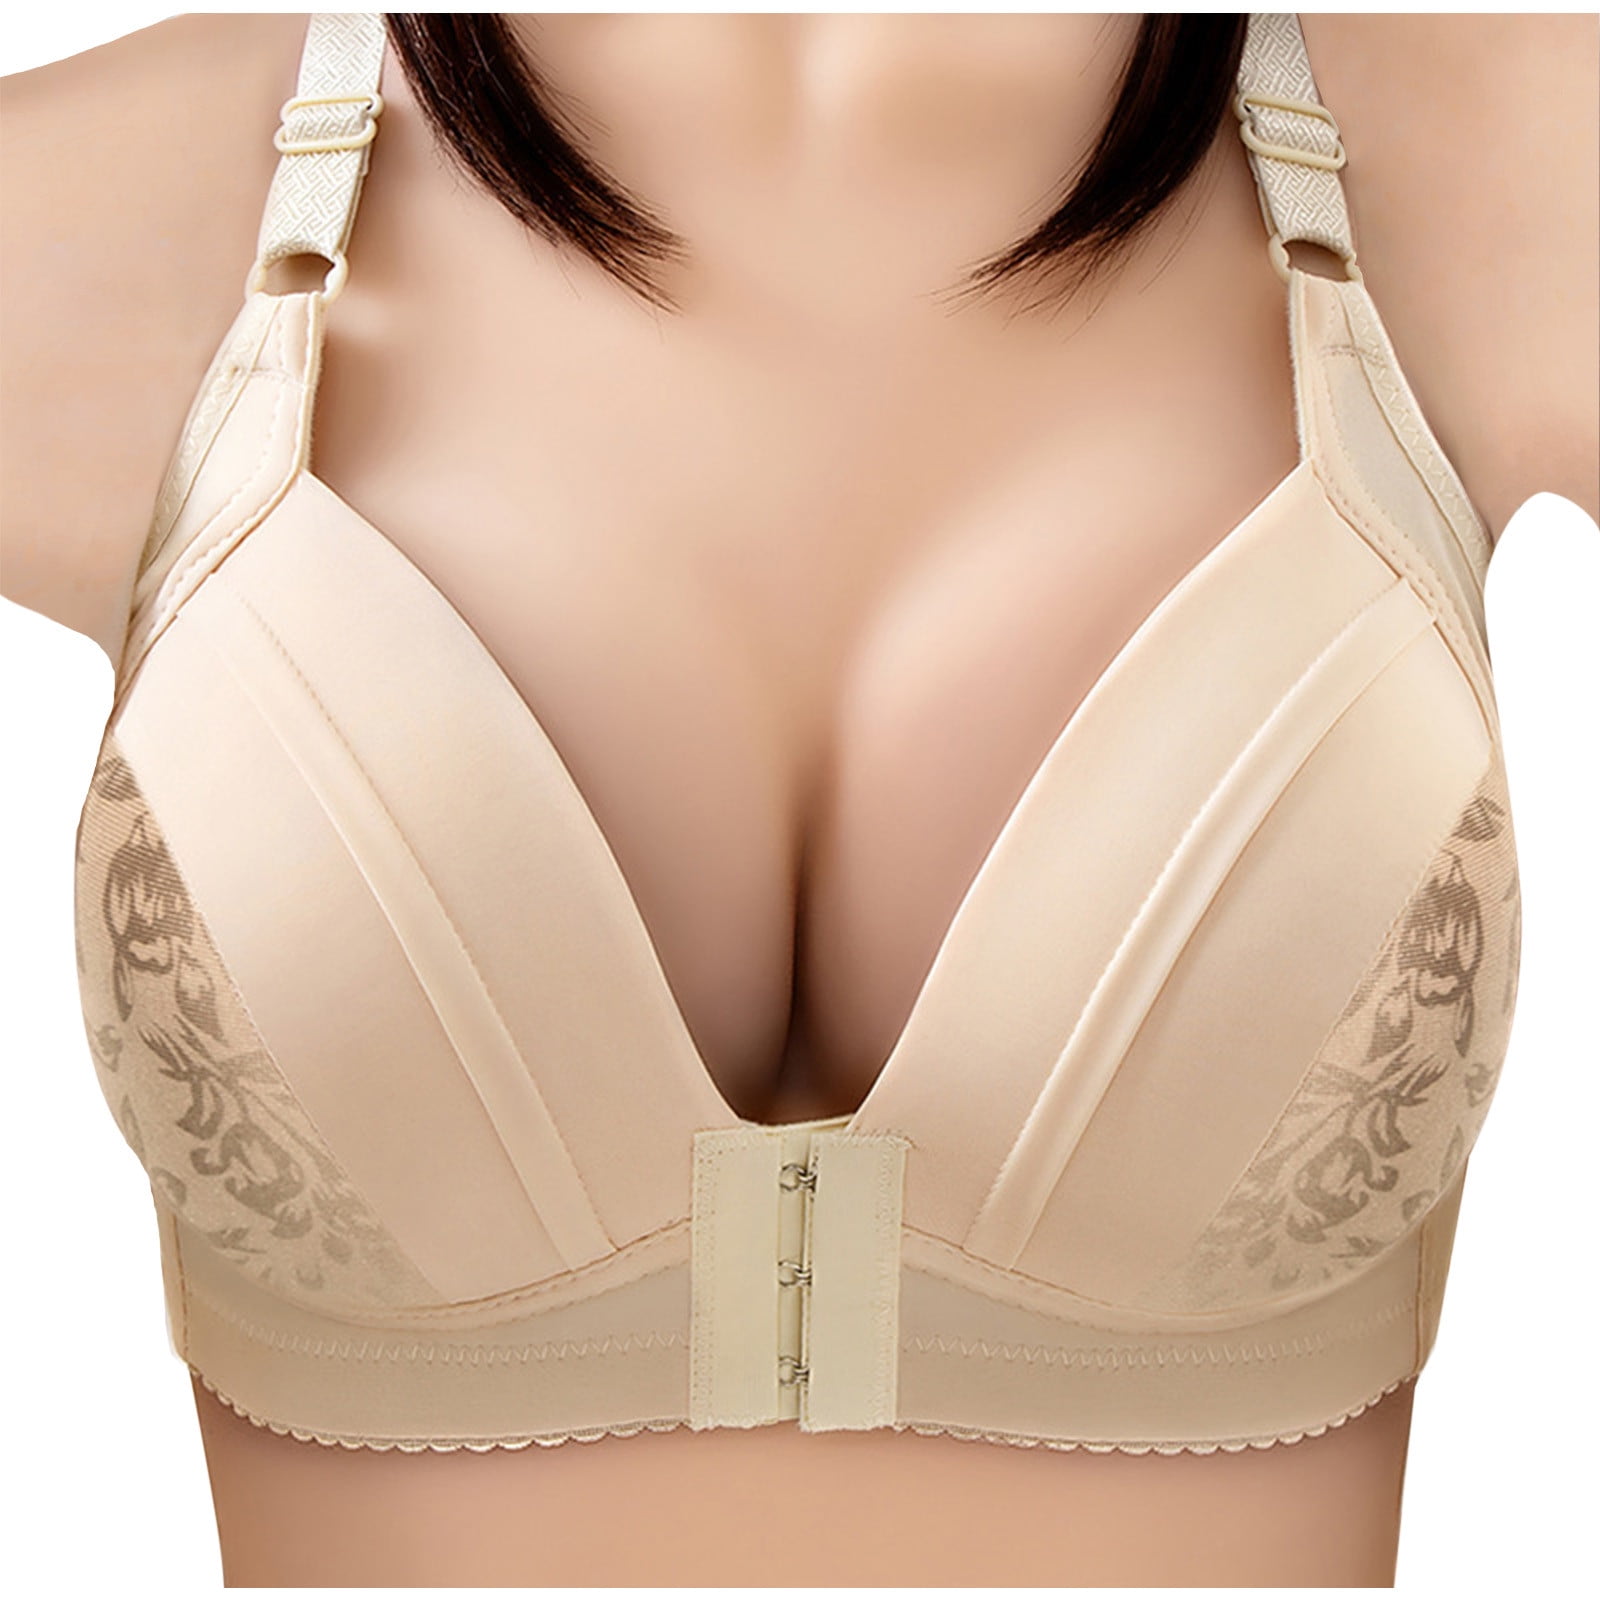 Plus Size Women Lace Bralette Padded Wireless Bra Floral Bras Front Closure  Back Smoothing Demi Bra Push up, Beyondshoping